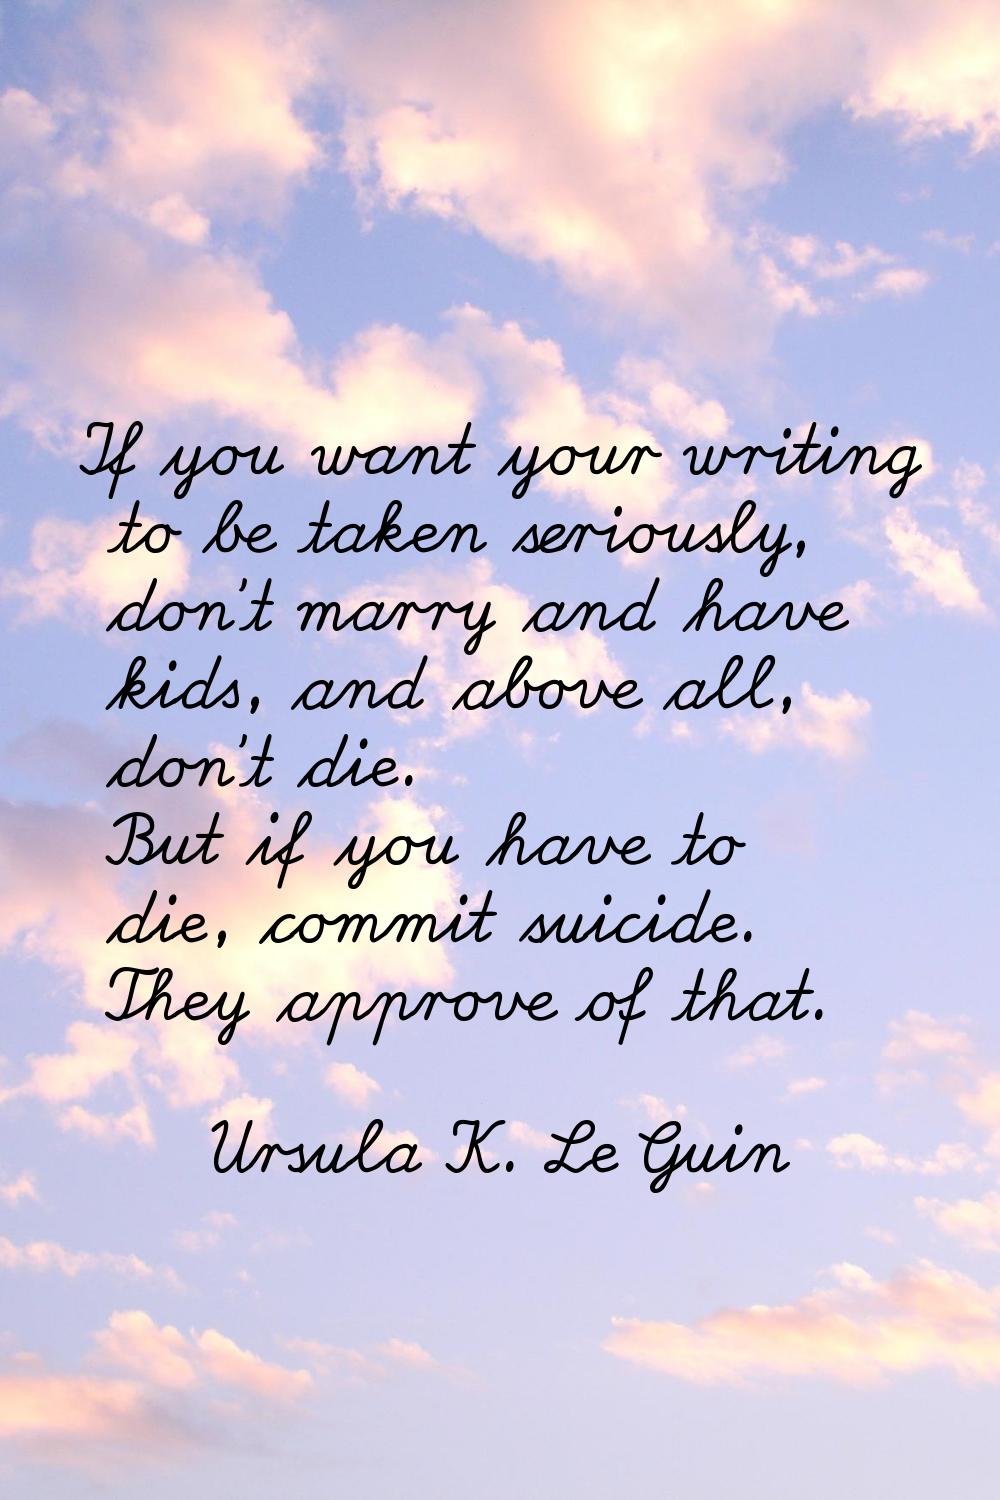 If you want your writing to be taken seriously, don't marry and have kids, and above all, don't die